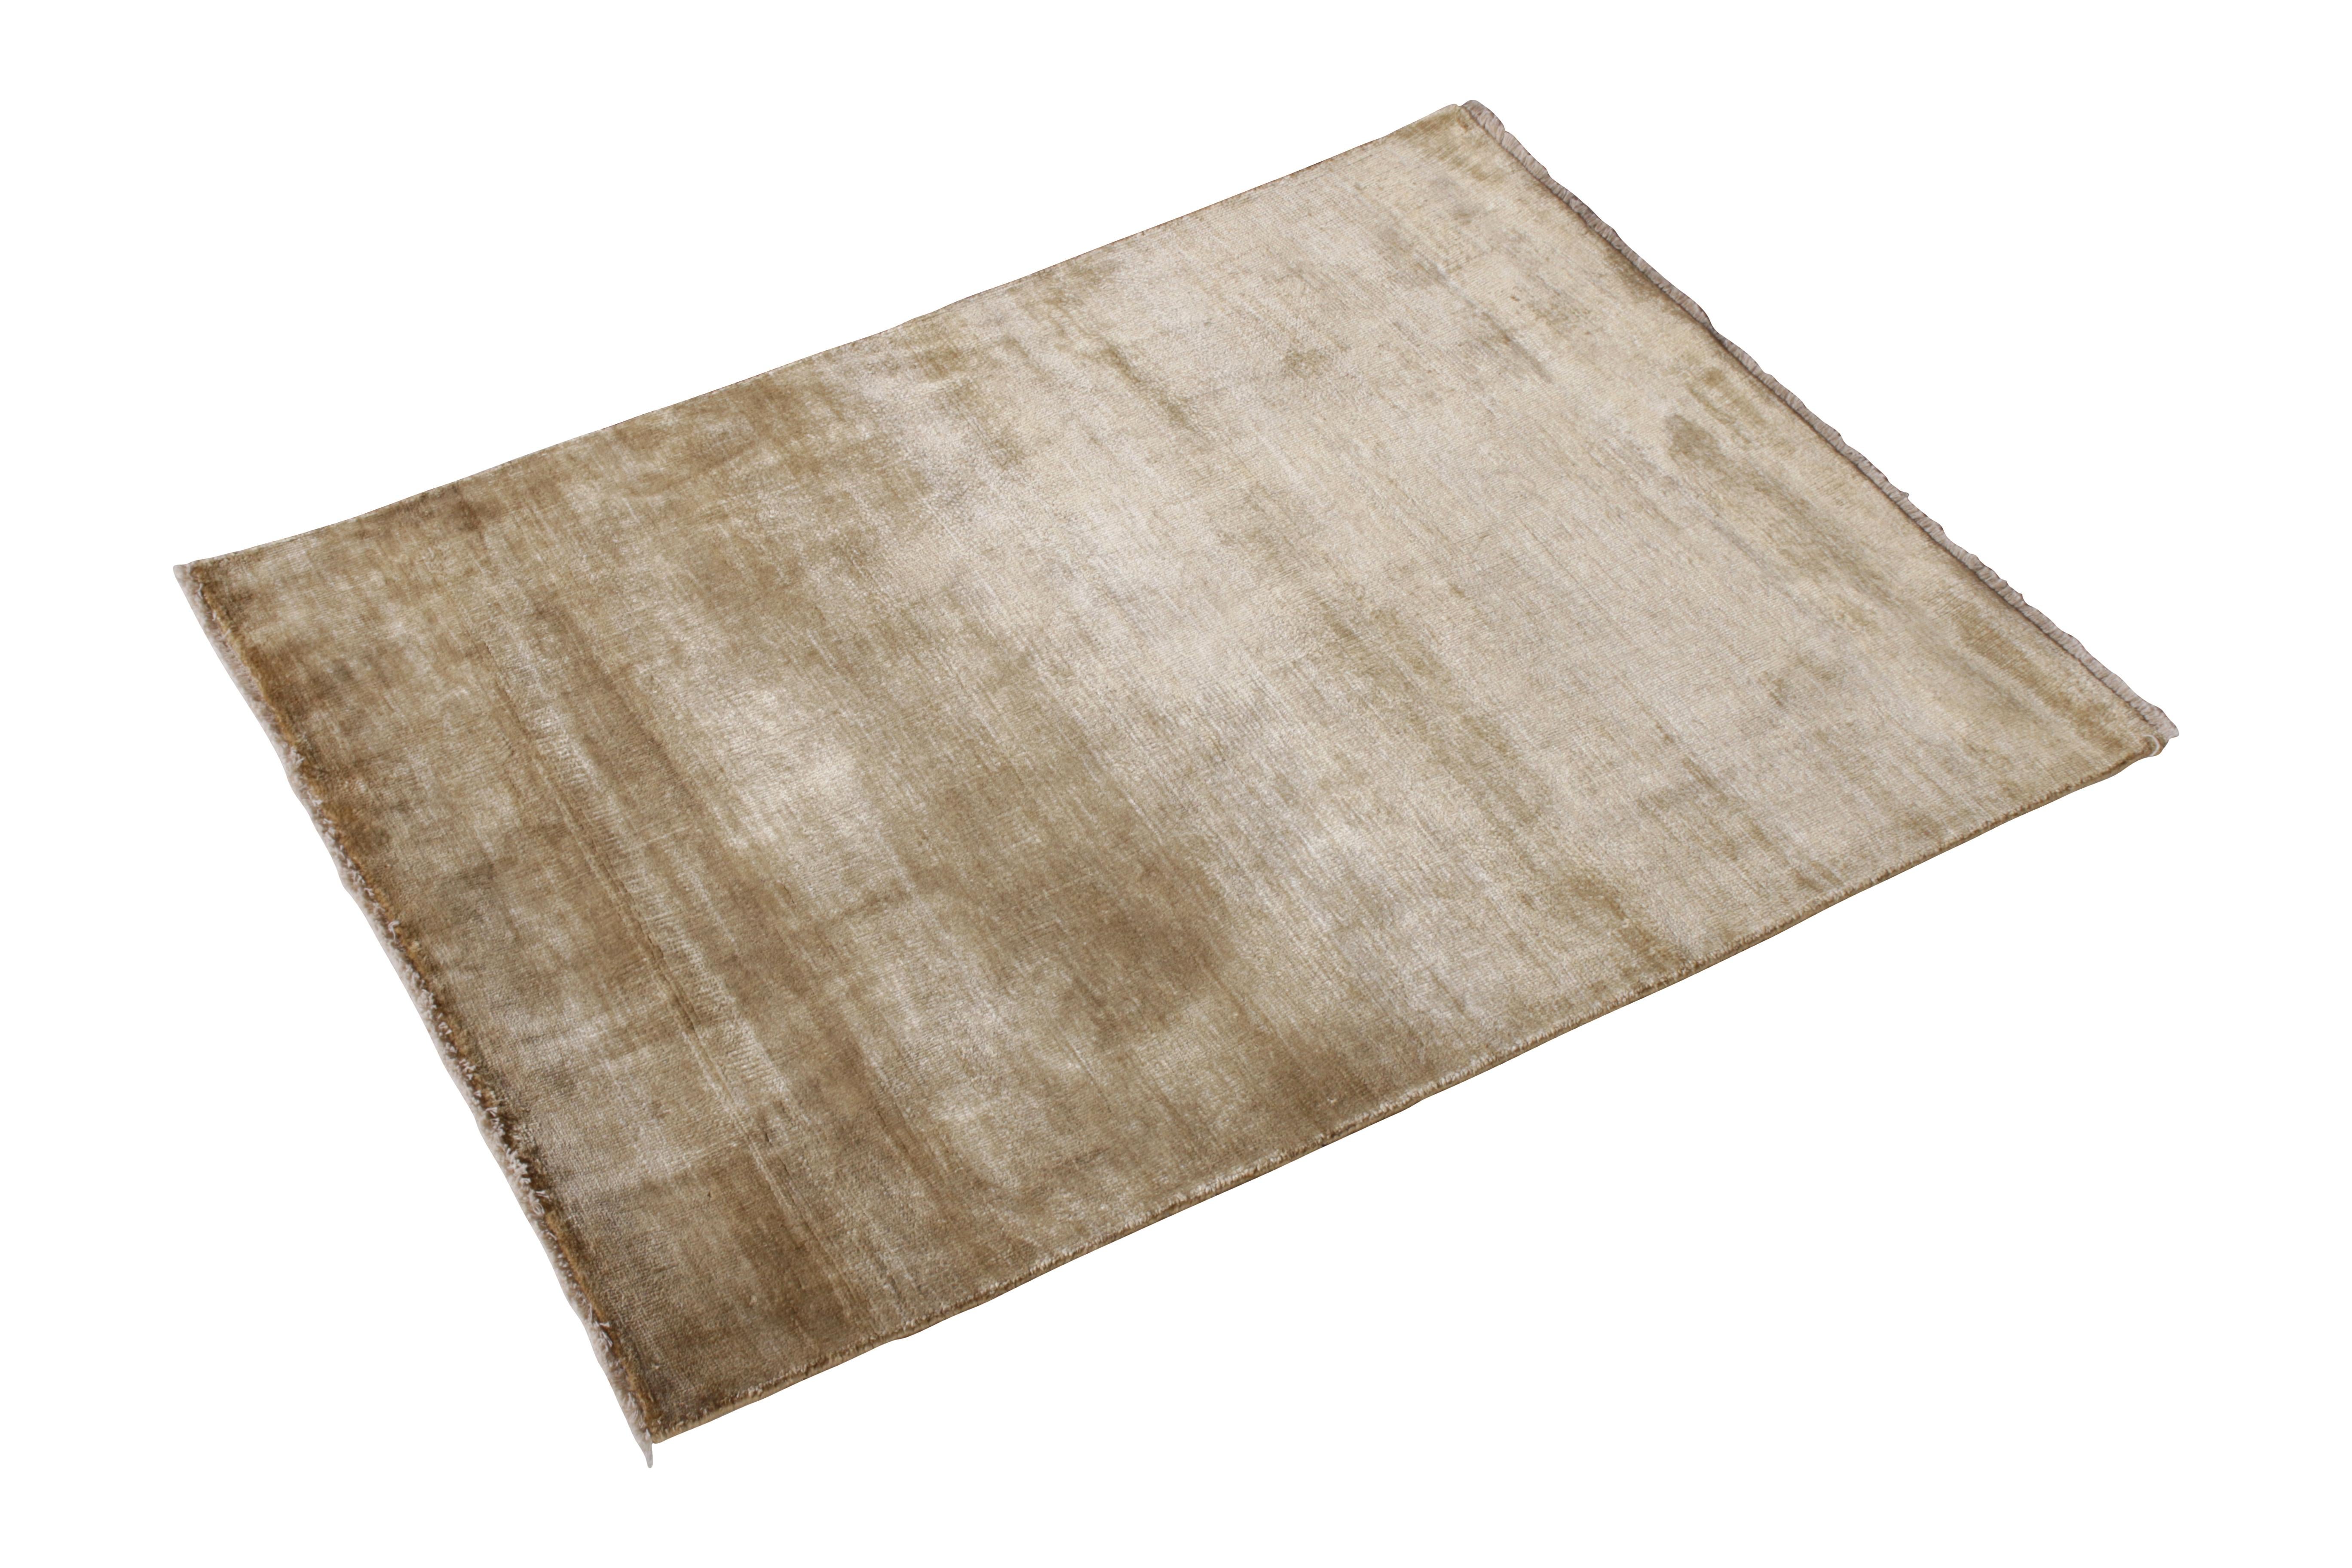 From Rug & Kilim’s Texture of Color collection, this square size 3 x 3 contemporary rug is hand knotted with a blend of all-natural and sari silk in this innovation of plain rug styles and comfortable versatility. The natural sheen of the silk blend